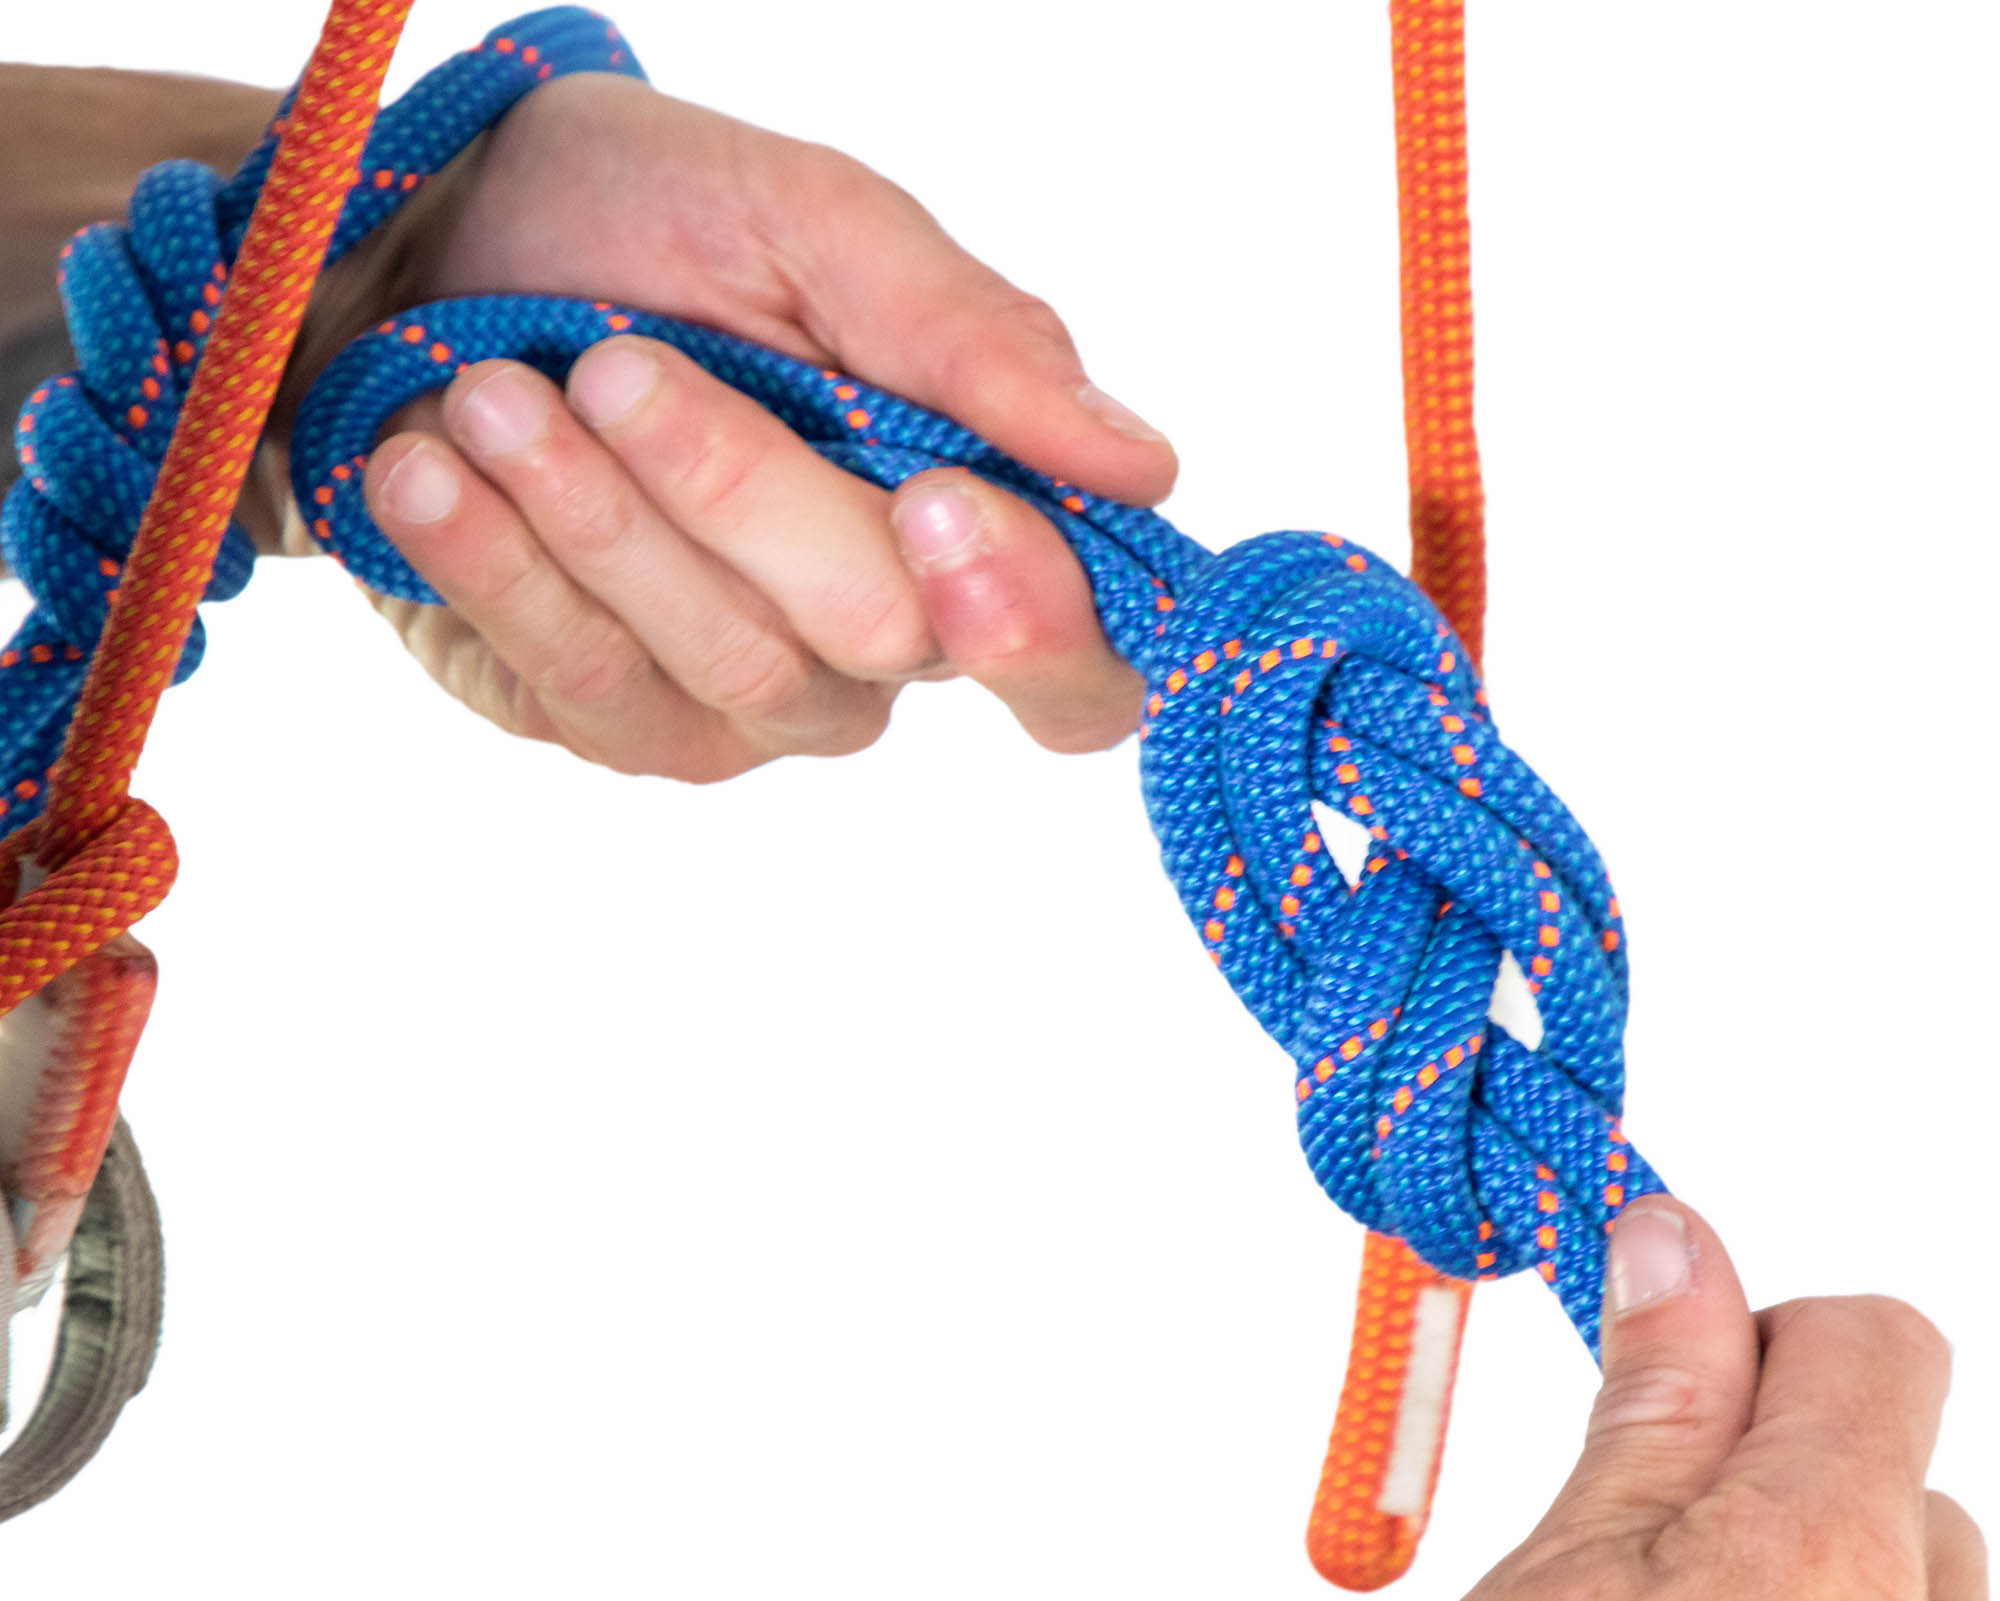 tying overhand knot on a bight